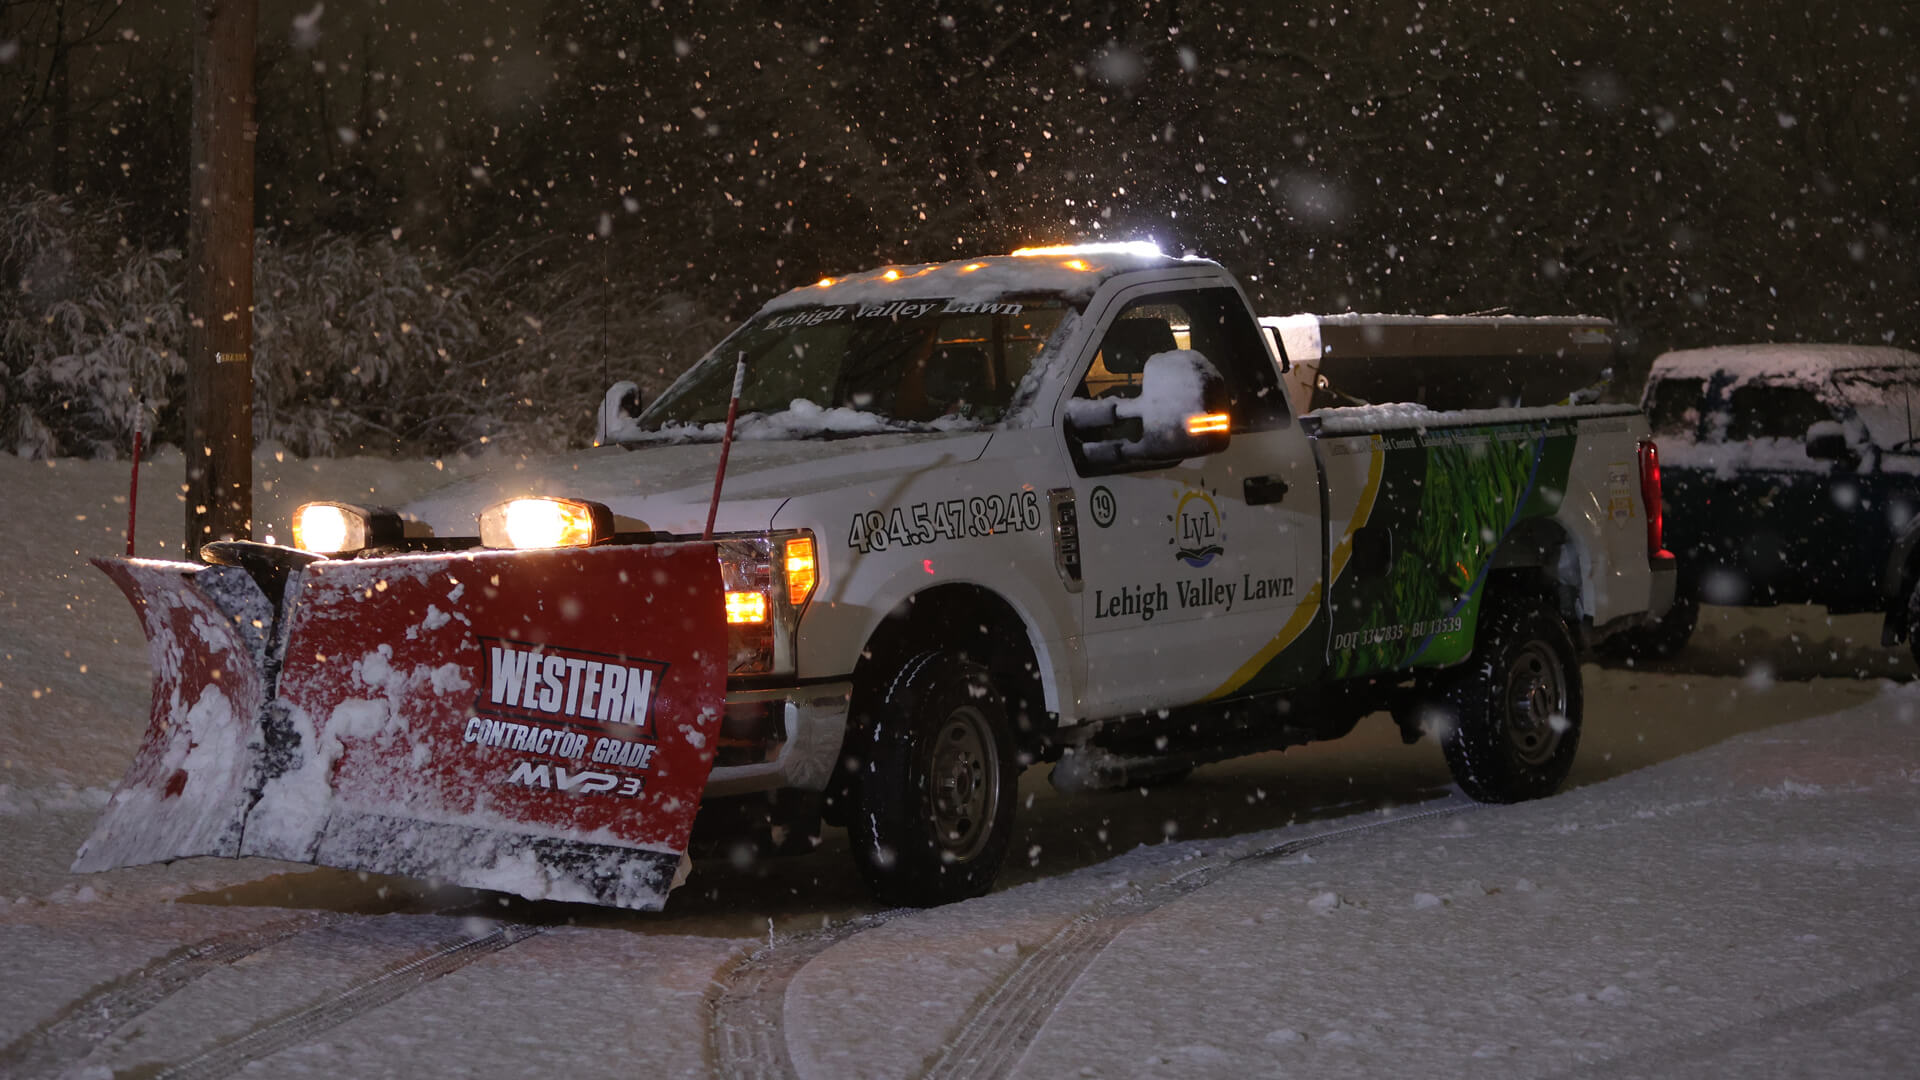 Lehigh Valley Lawn work truck clearing snow from a commercial lot in Macungie, PA.